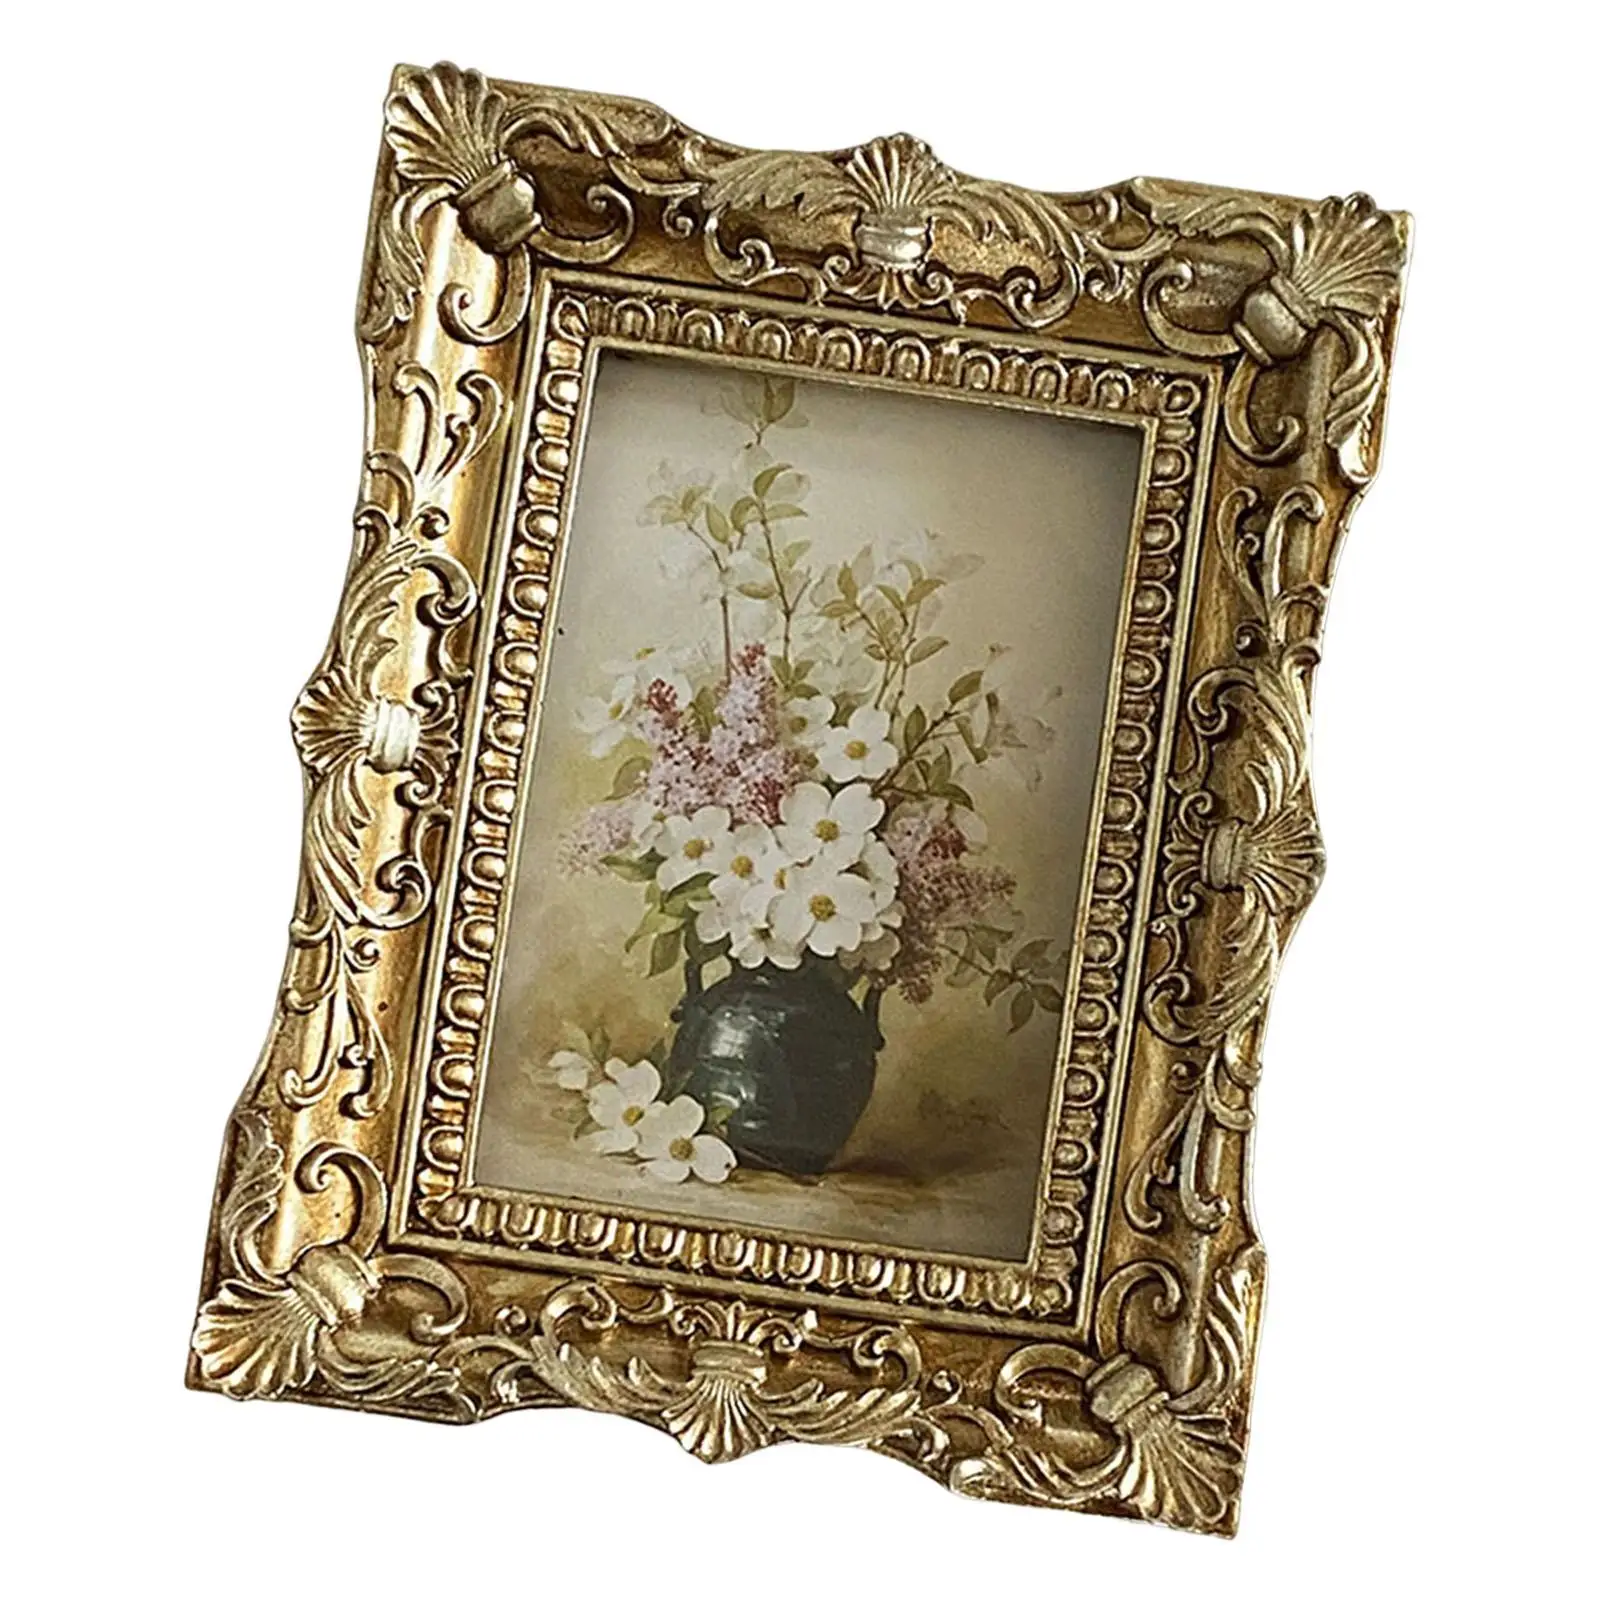 Retro Style Photo Frame Picture Holder Ornate for Bedroom Hallway Decoration